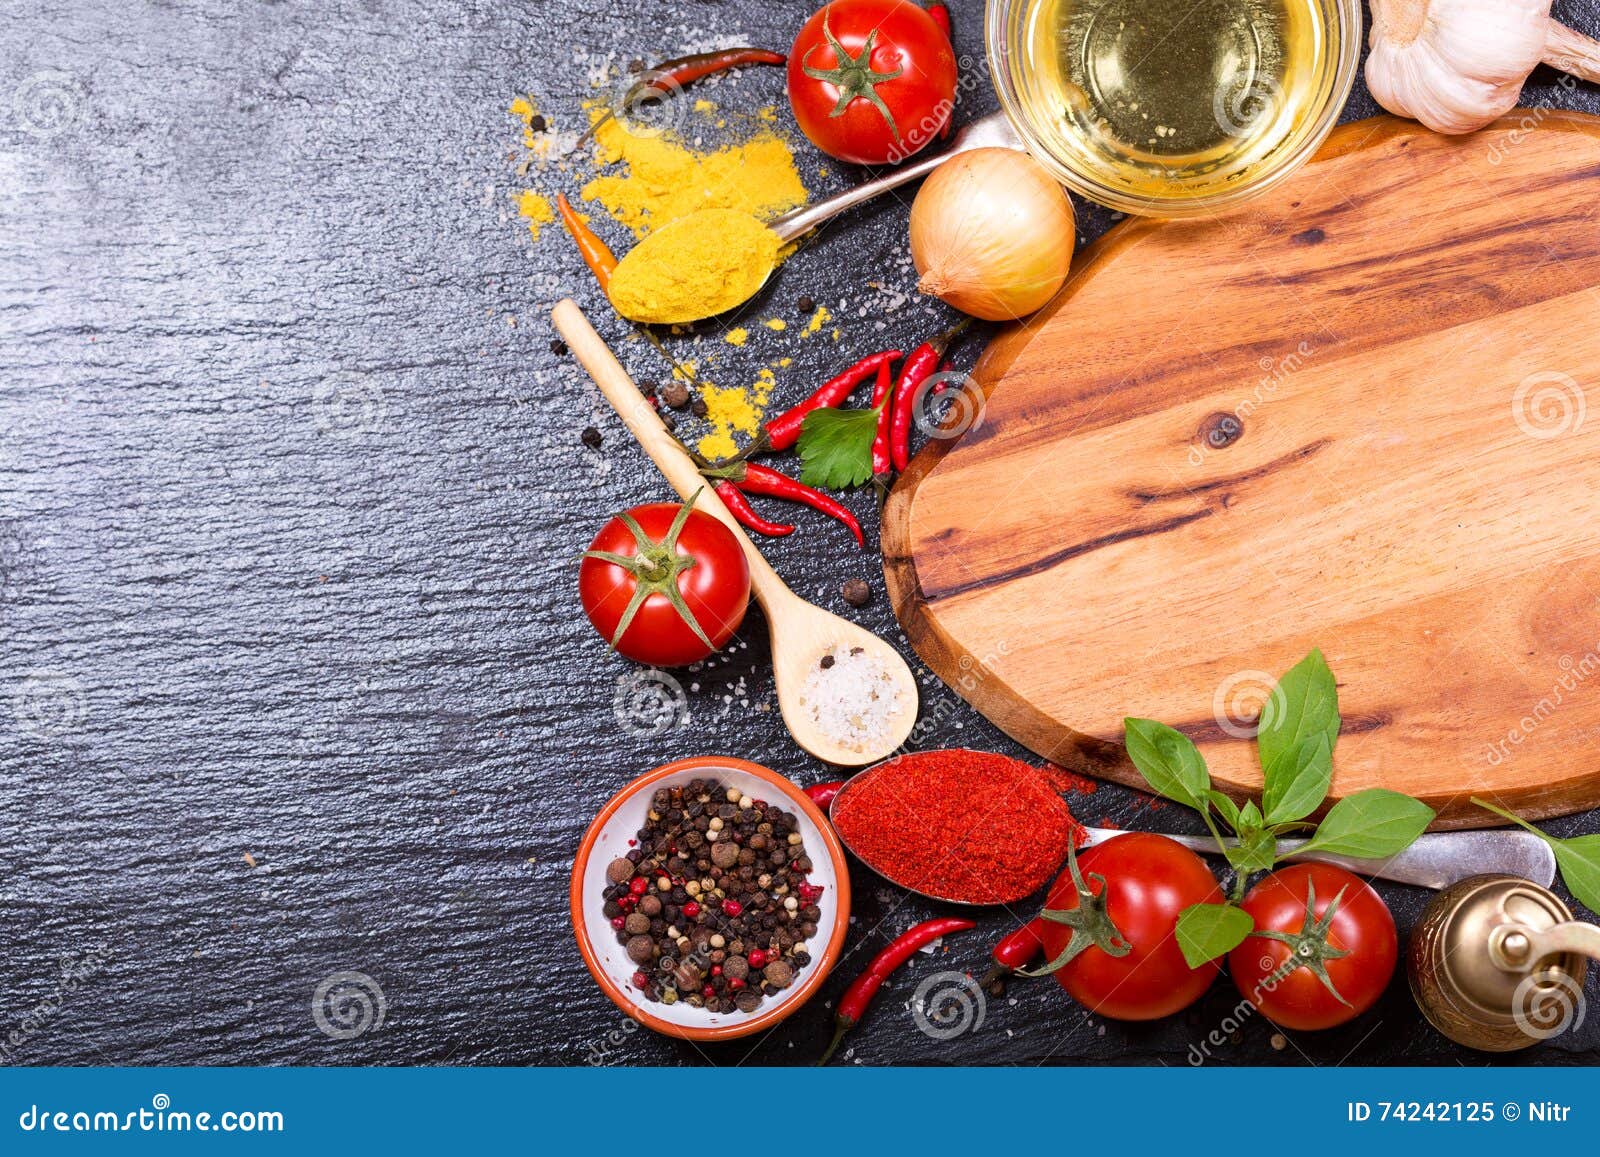 Food Ingredients for Cooking with Empty Board Stock Image - Image of ...